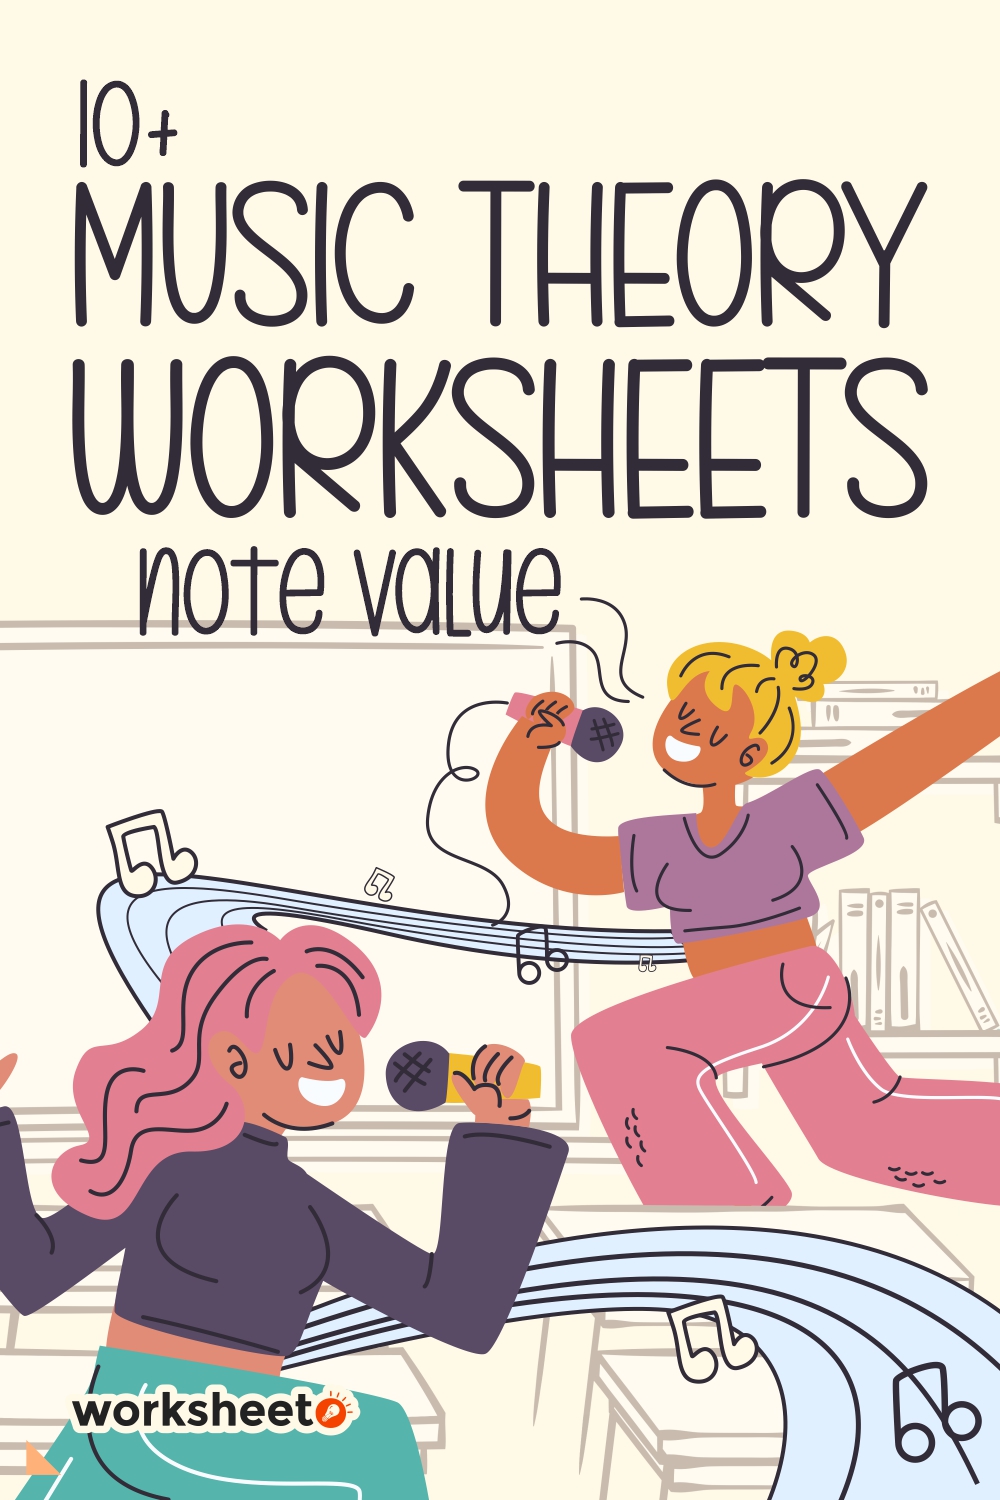 11 Images of Music Theory Worksheets Note Value